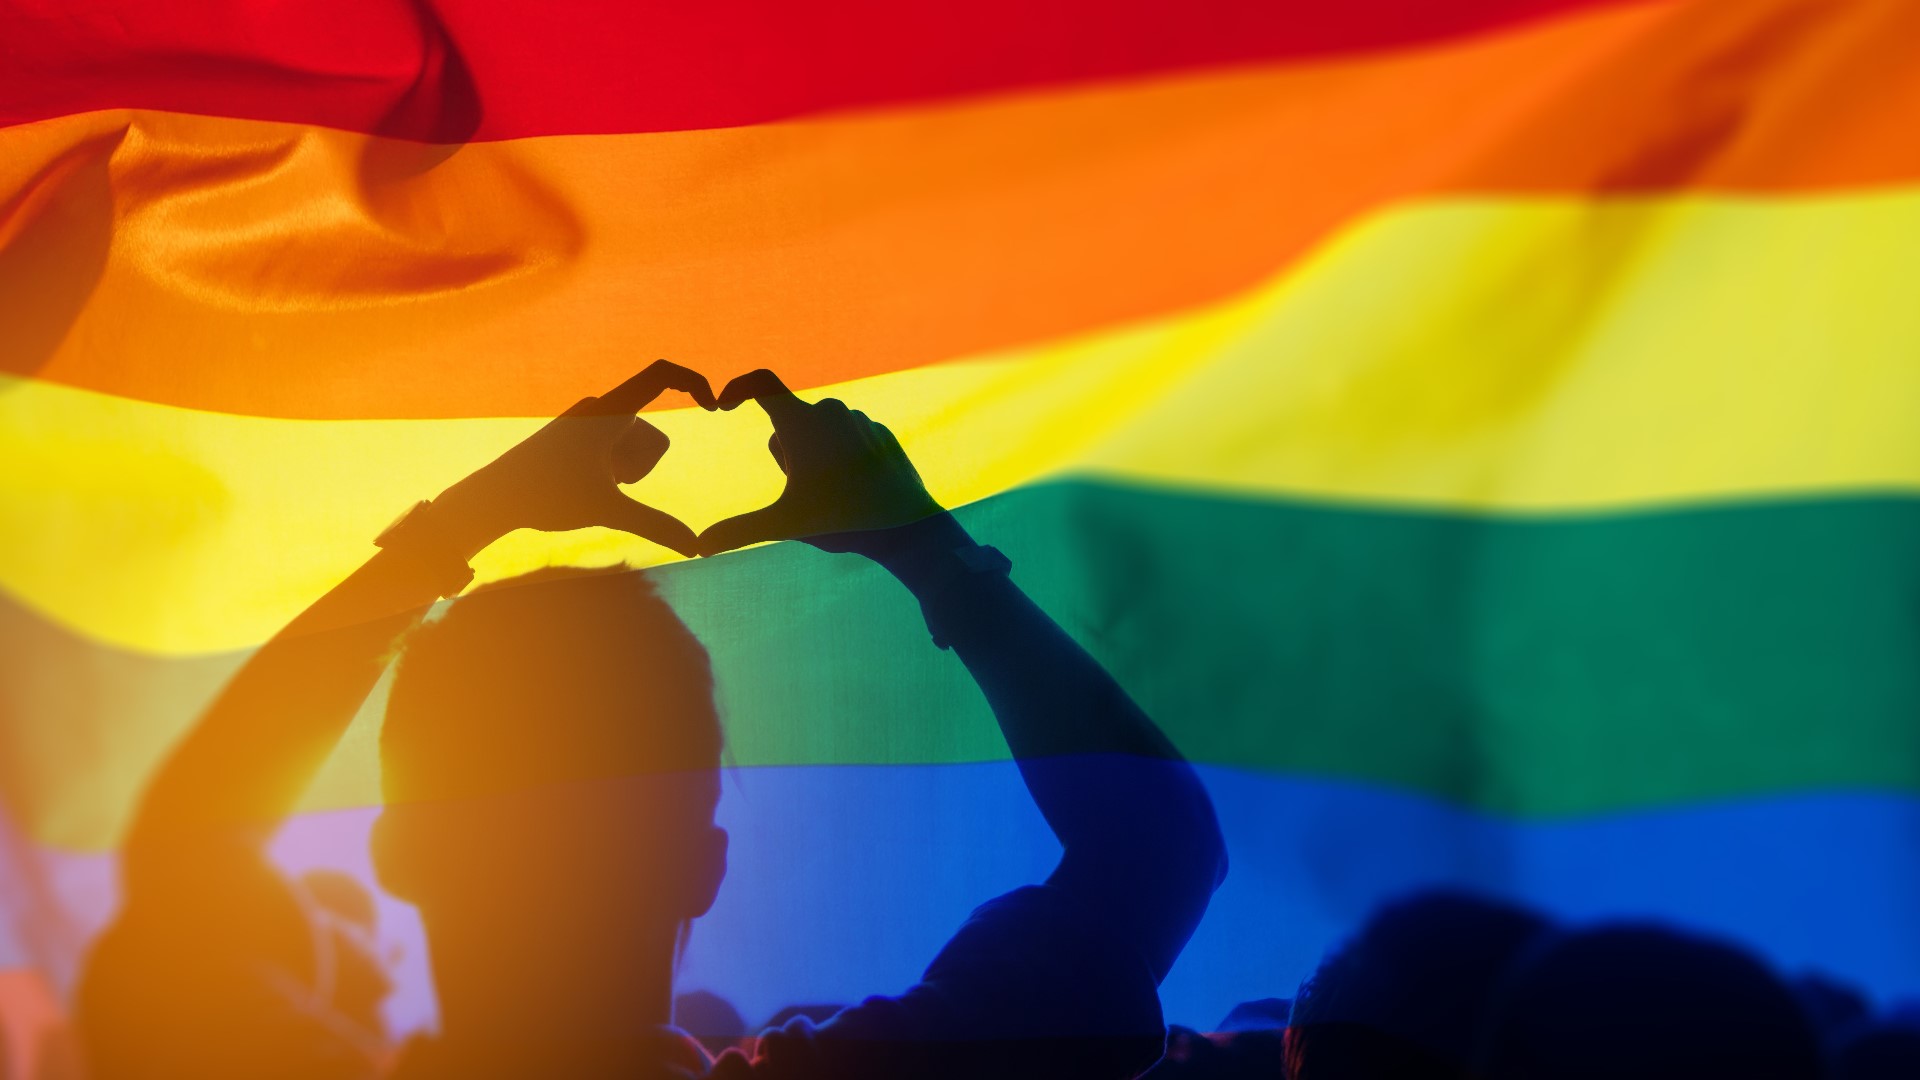 According to the CDC, 2.6 million young LGBTQ+ people are facing health disparities.